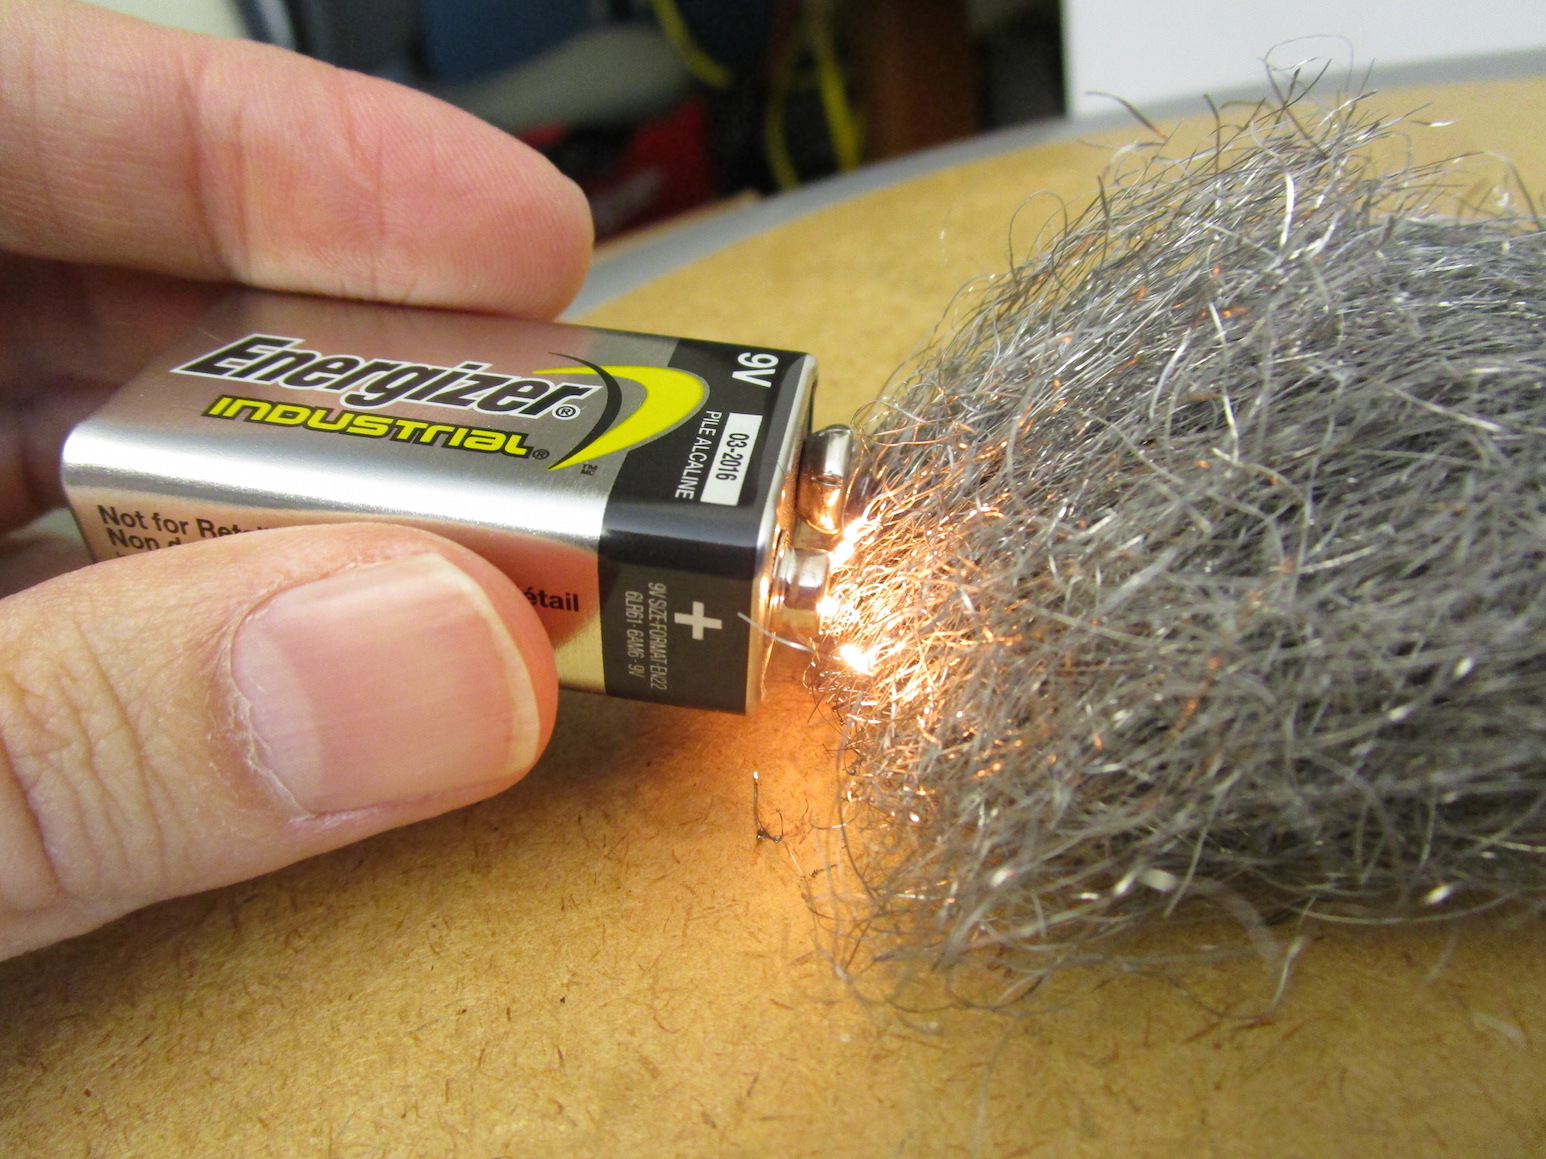 The Battery and Steel Wool